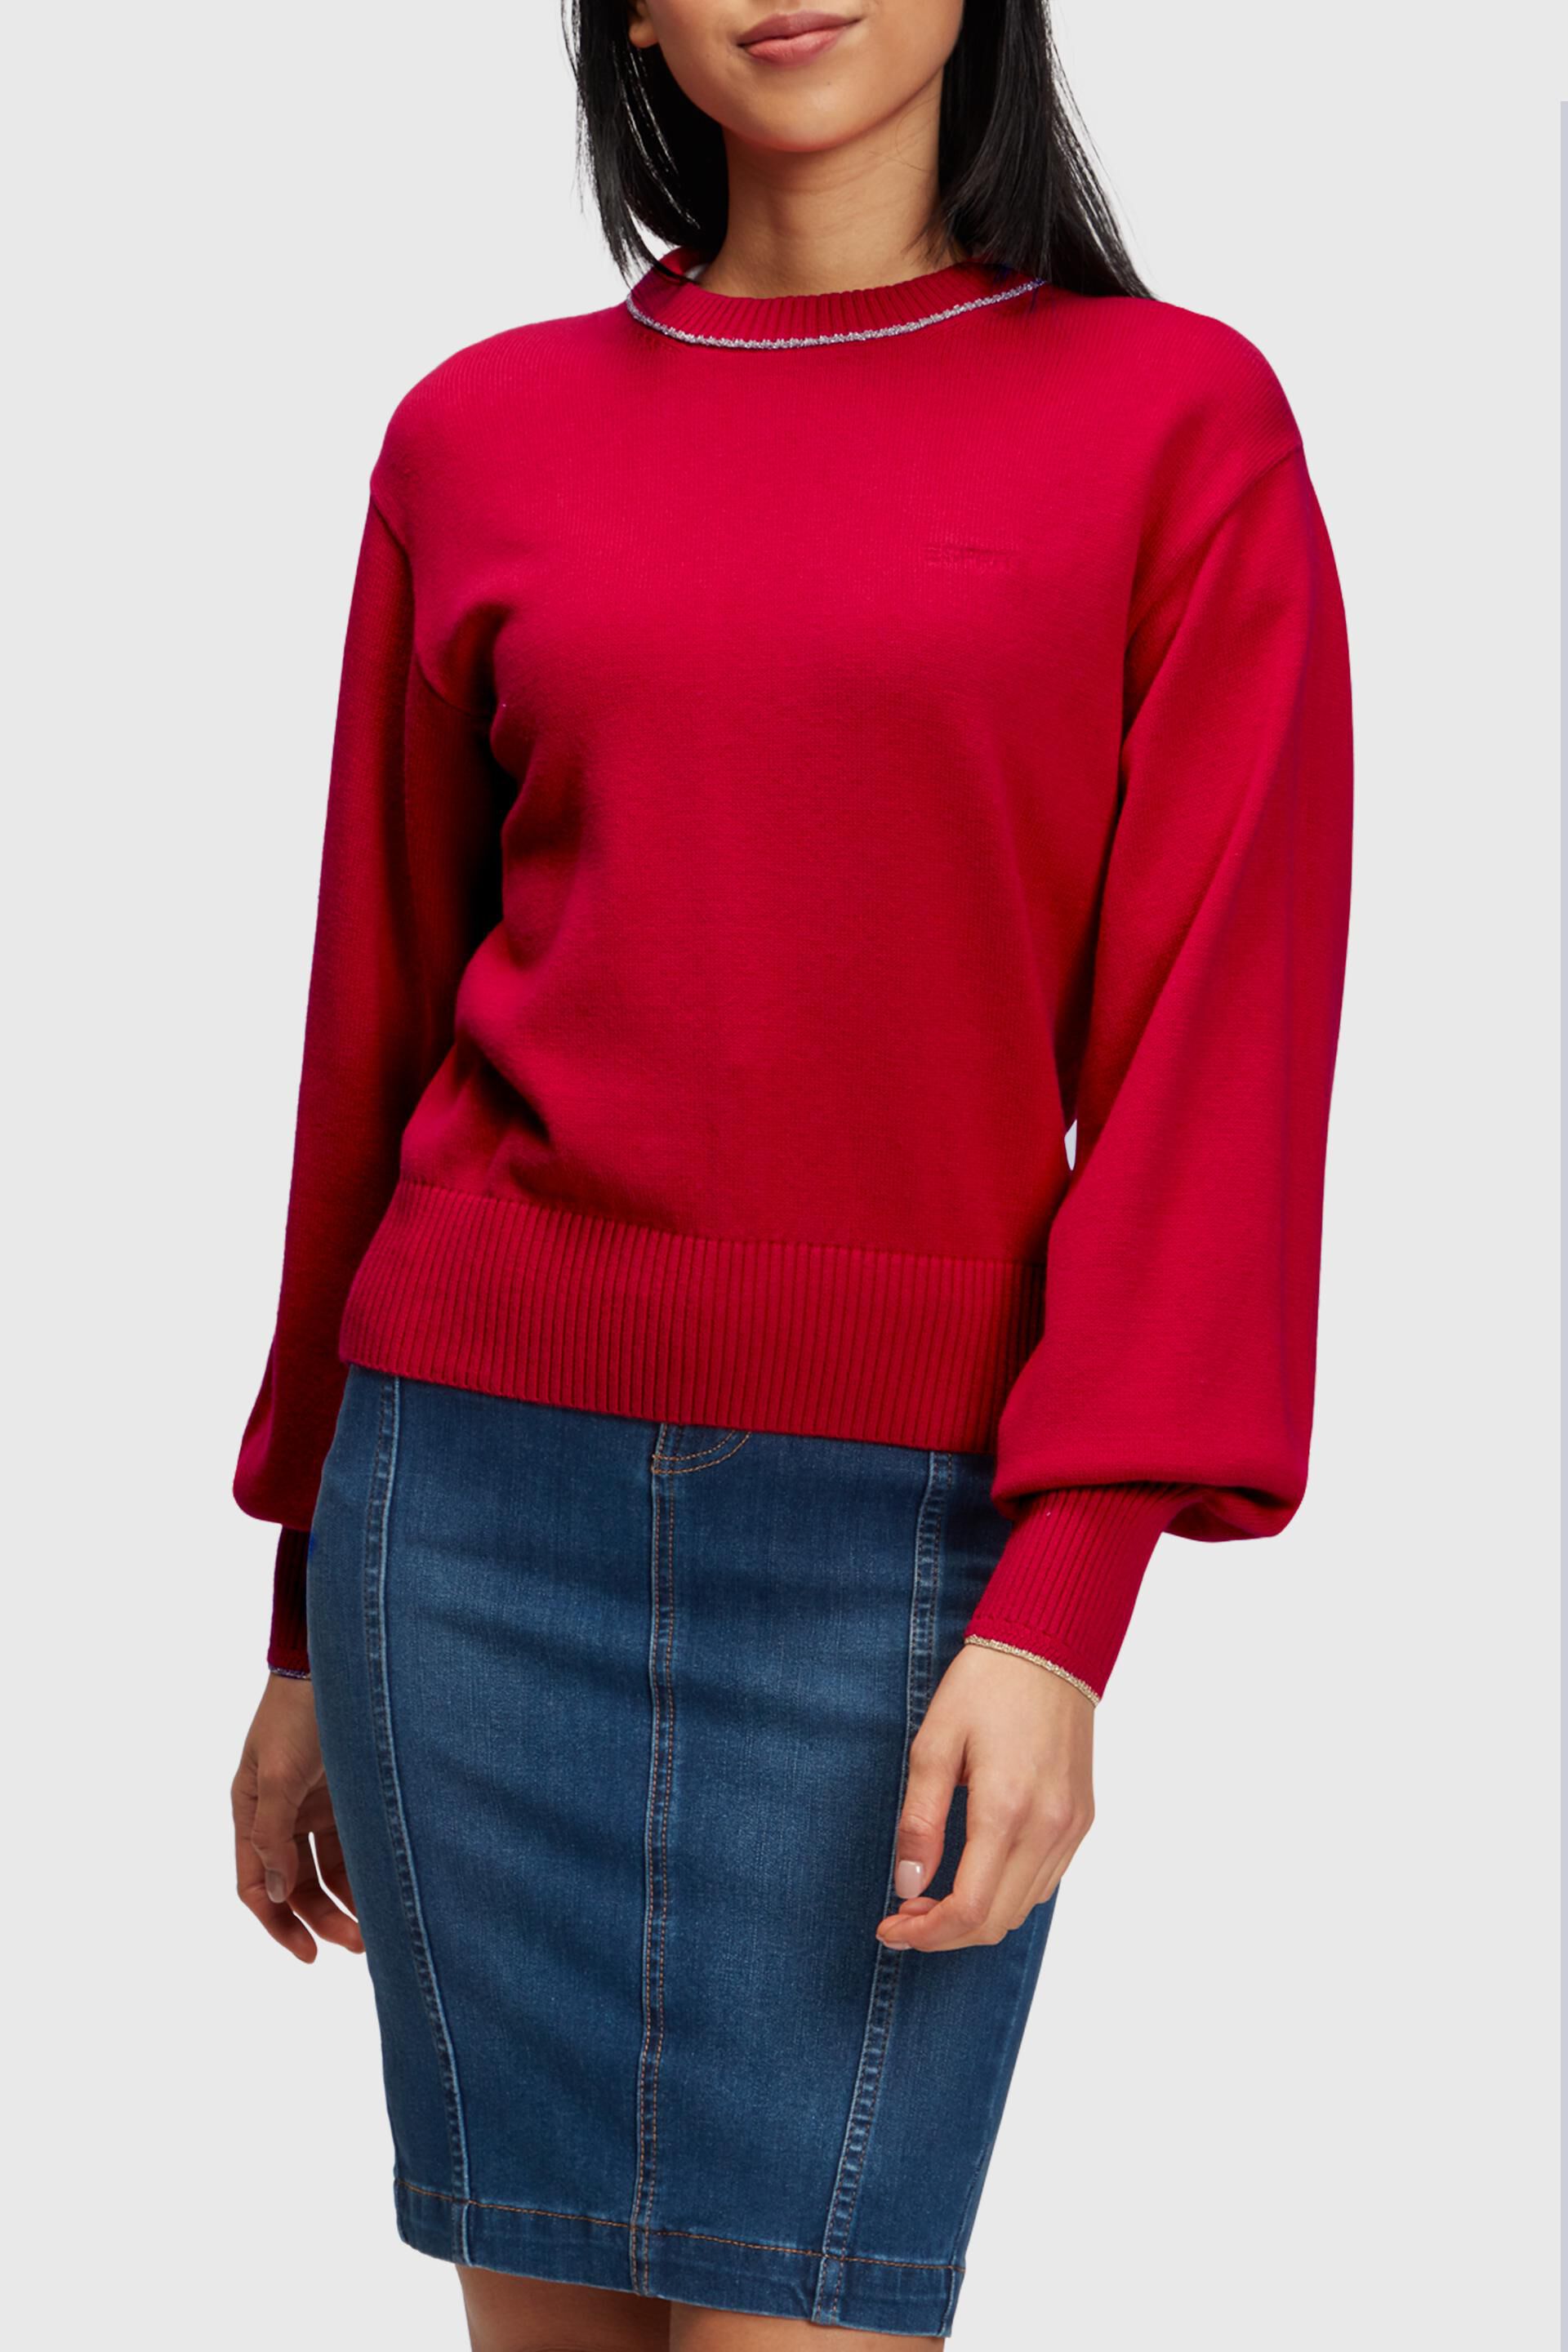 Esprit cashmere with sleeved jumper Puffed